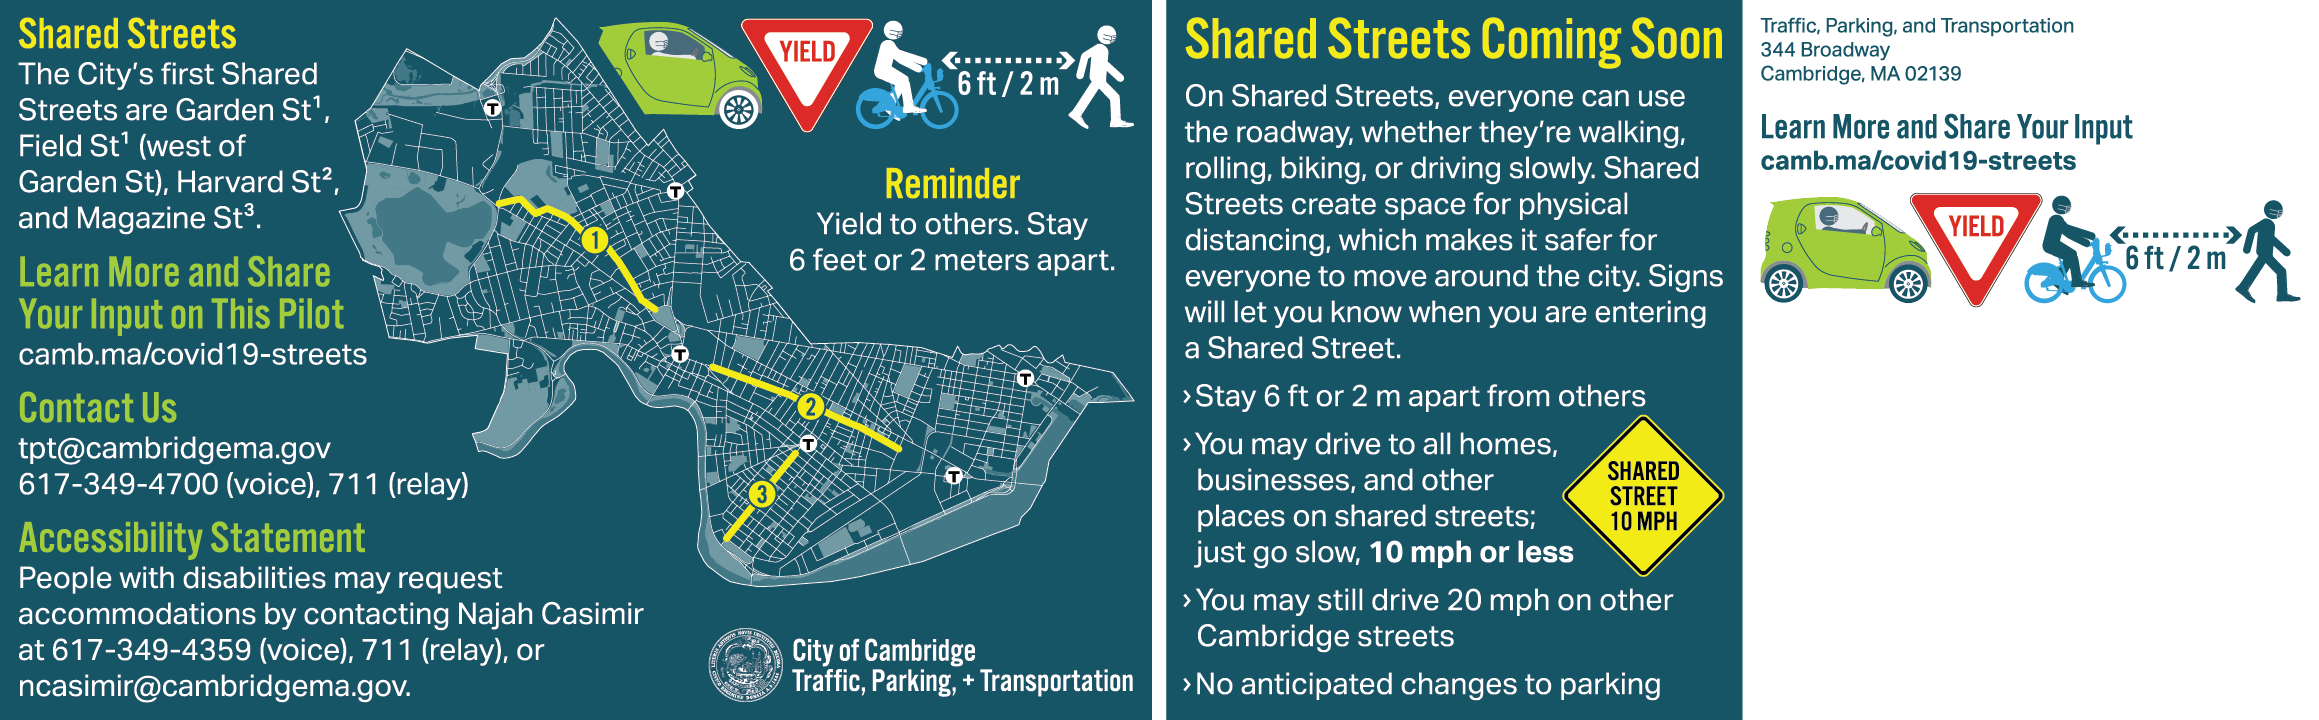 Postcard announcing the Shared Streets program